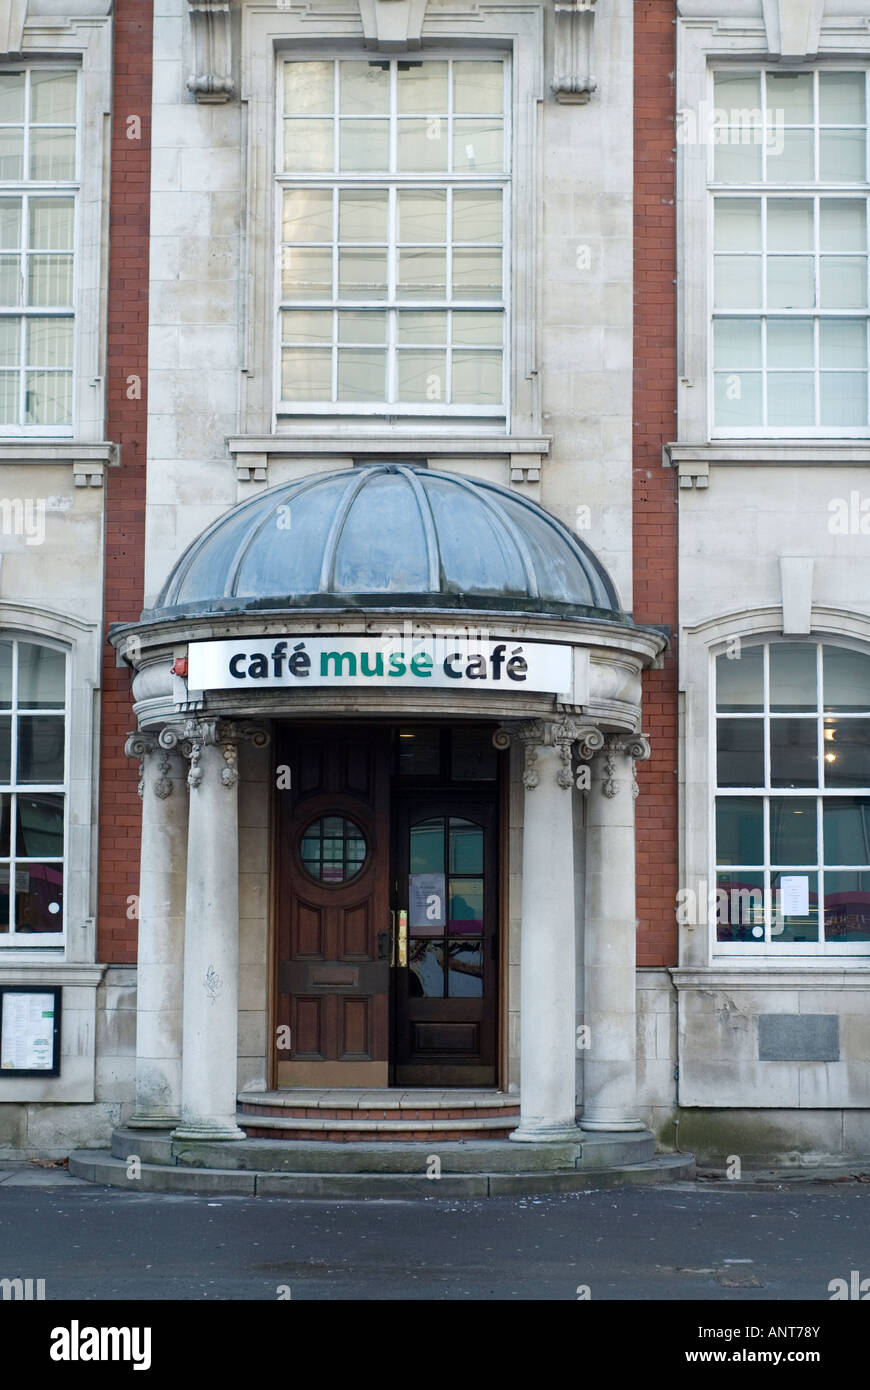 Cafe muse in The Manchester museum University of Manchester on Oxford Road UK Stock Photo